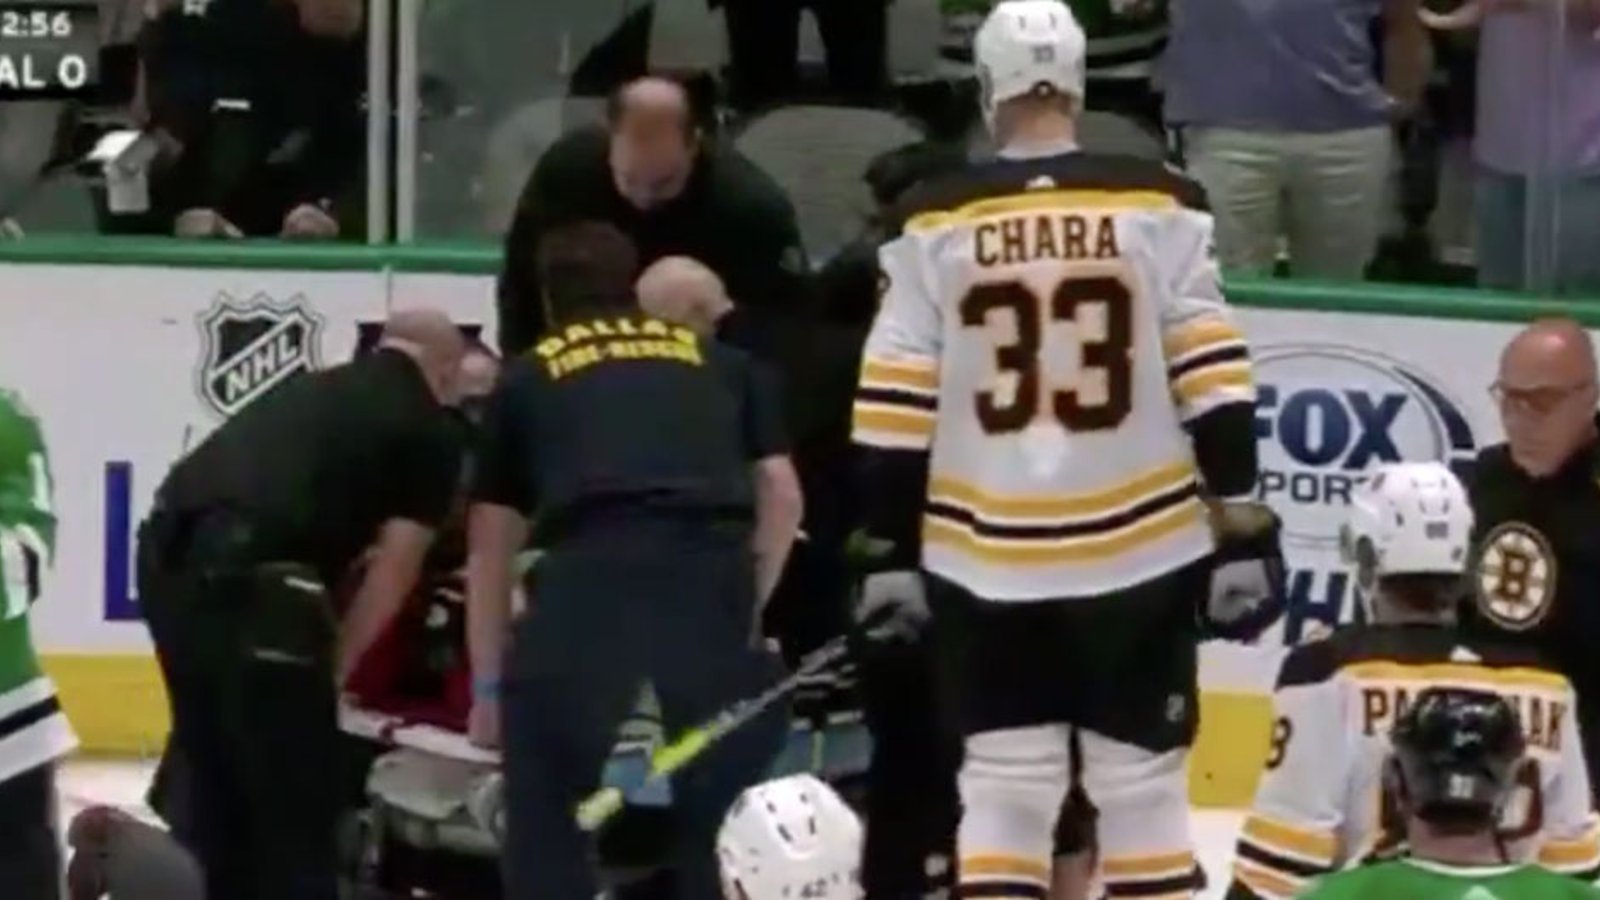 Chara makes incredibly classy move as Polak is stretchered off the ice 